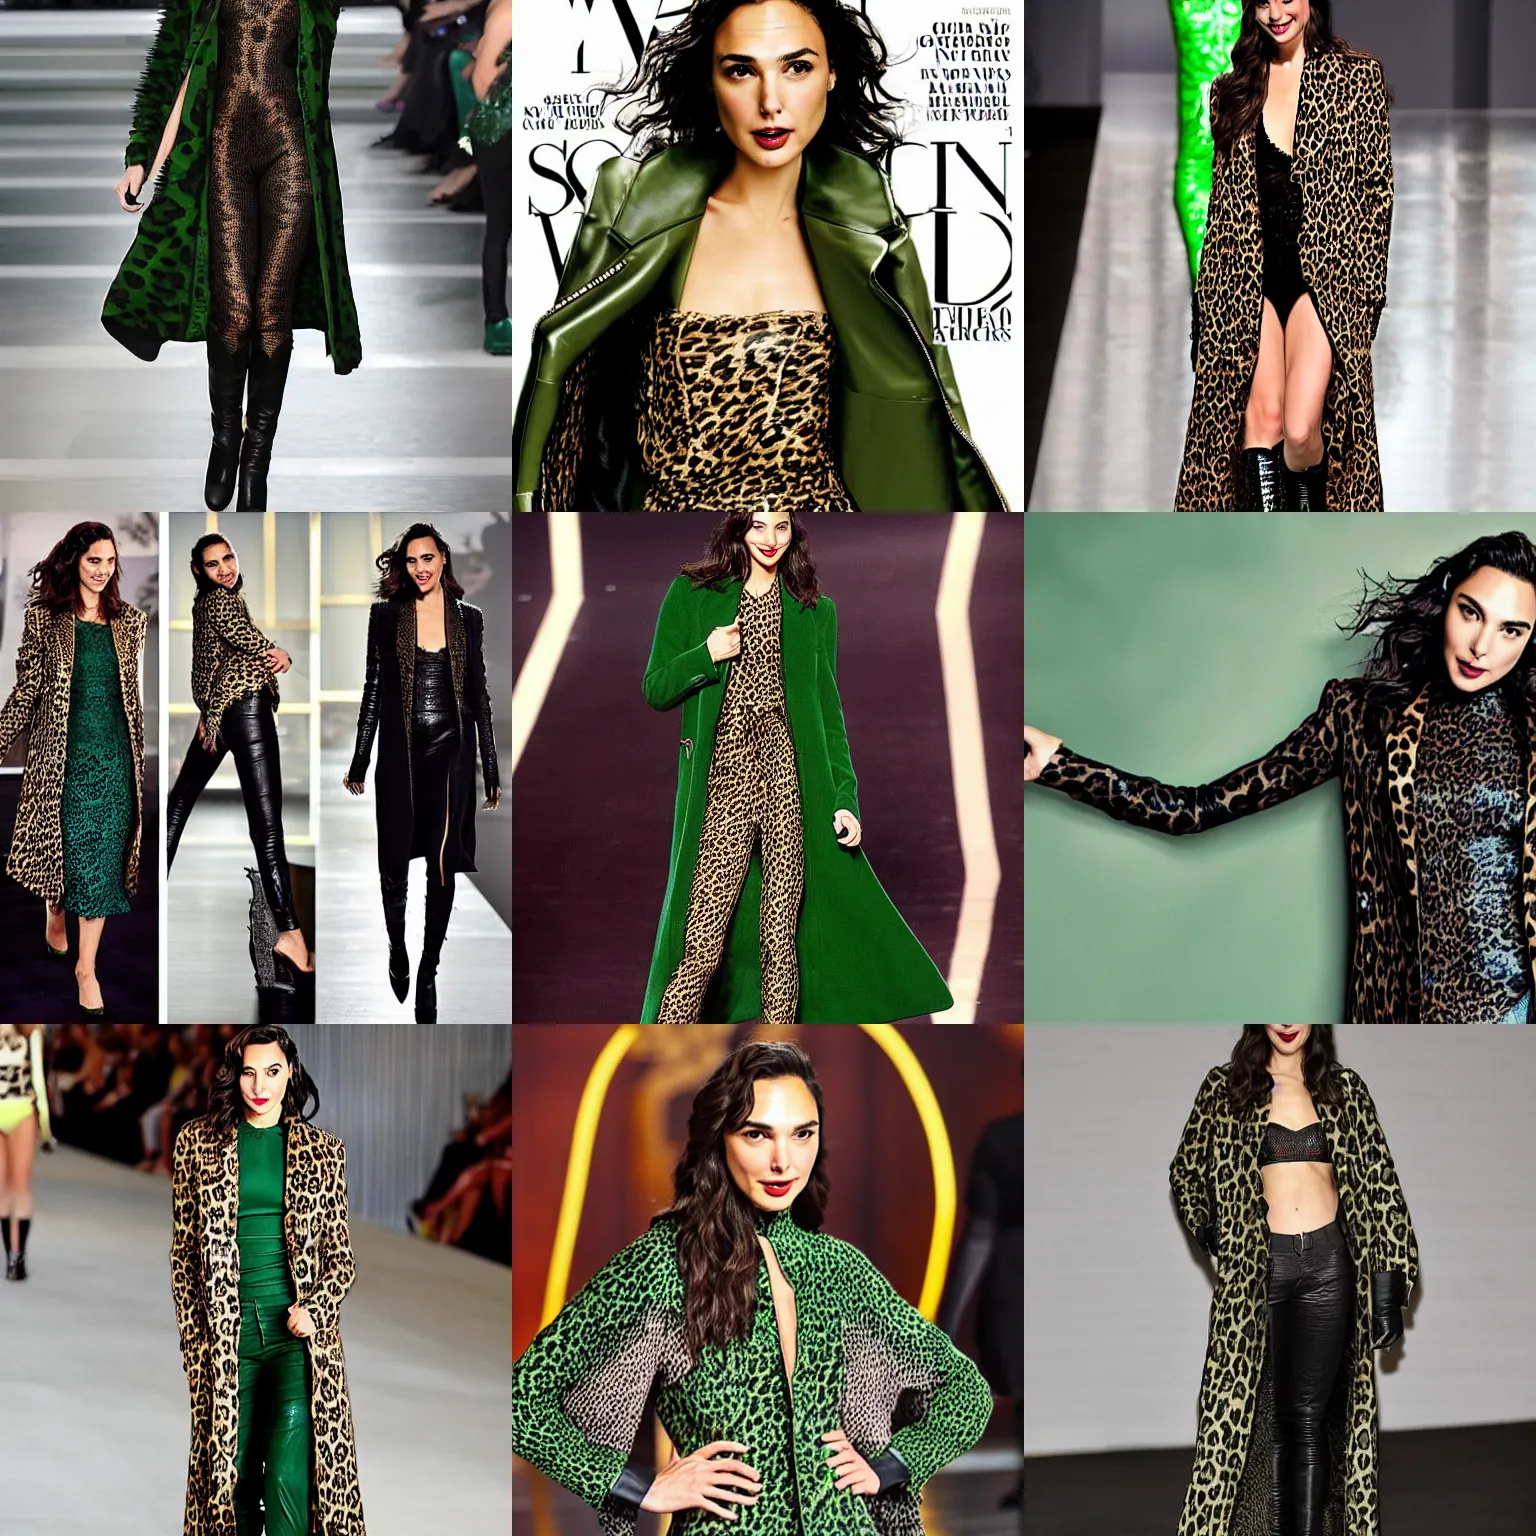 Prompt: Gal Gadot on the runway modeling a Long Leopard Coat with black leather spikes and green lace, photographed in the style of Mario Testino